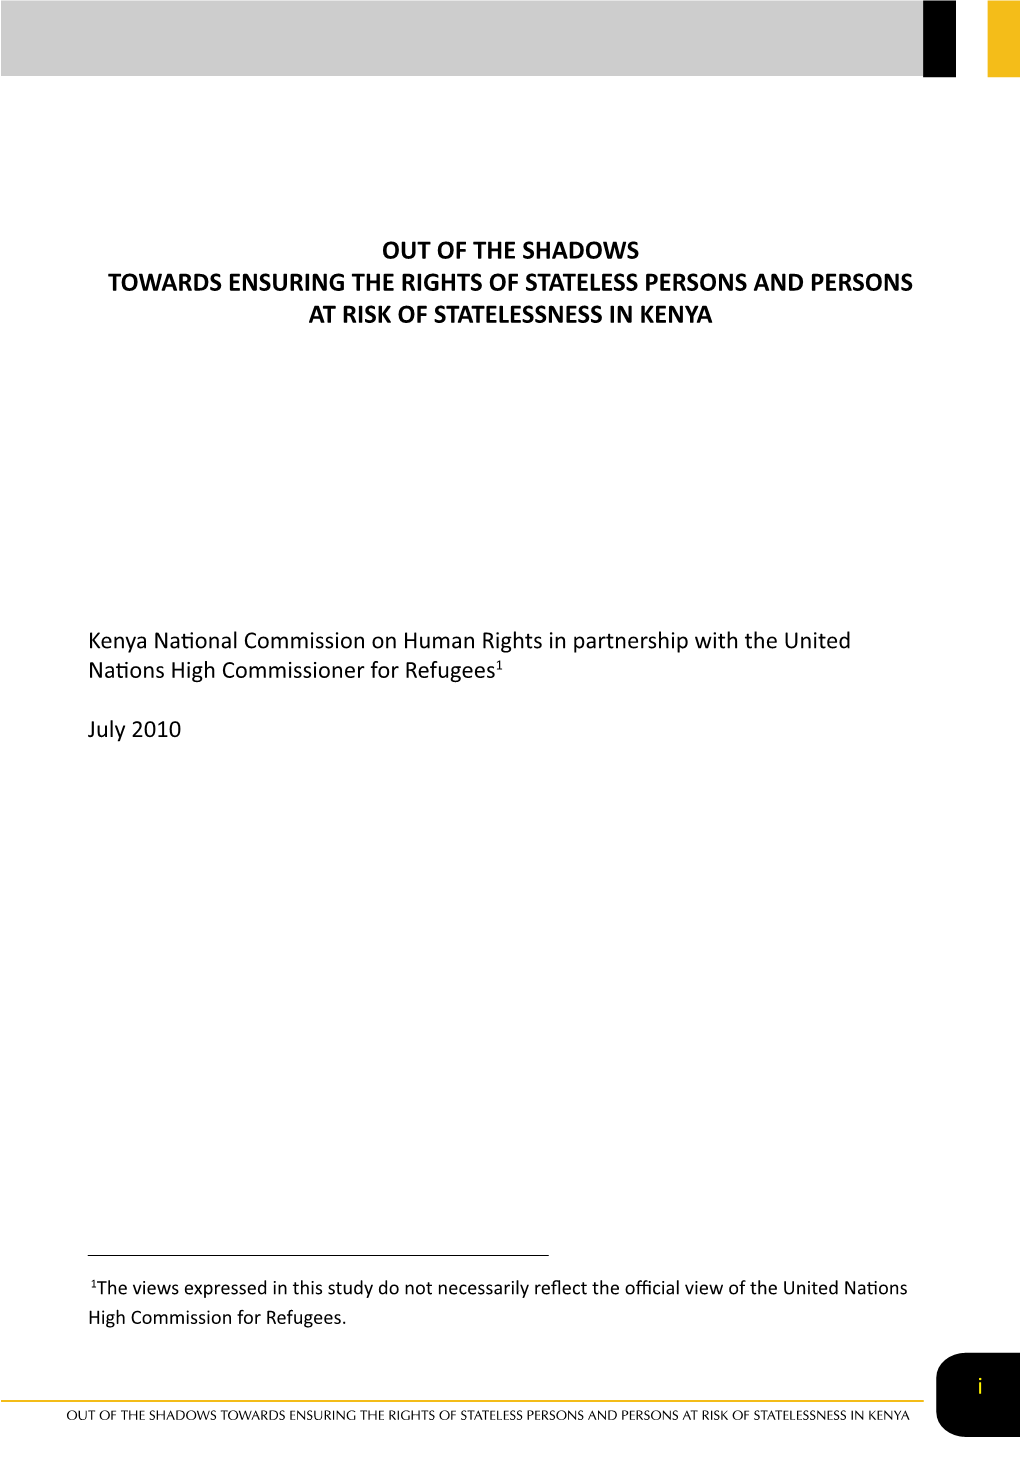 Out of the Shadows Towards Ensuring the Rights of Stateless Persons and Persons at Risk of Statelessness in Kenya Table of Contents